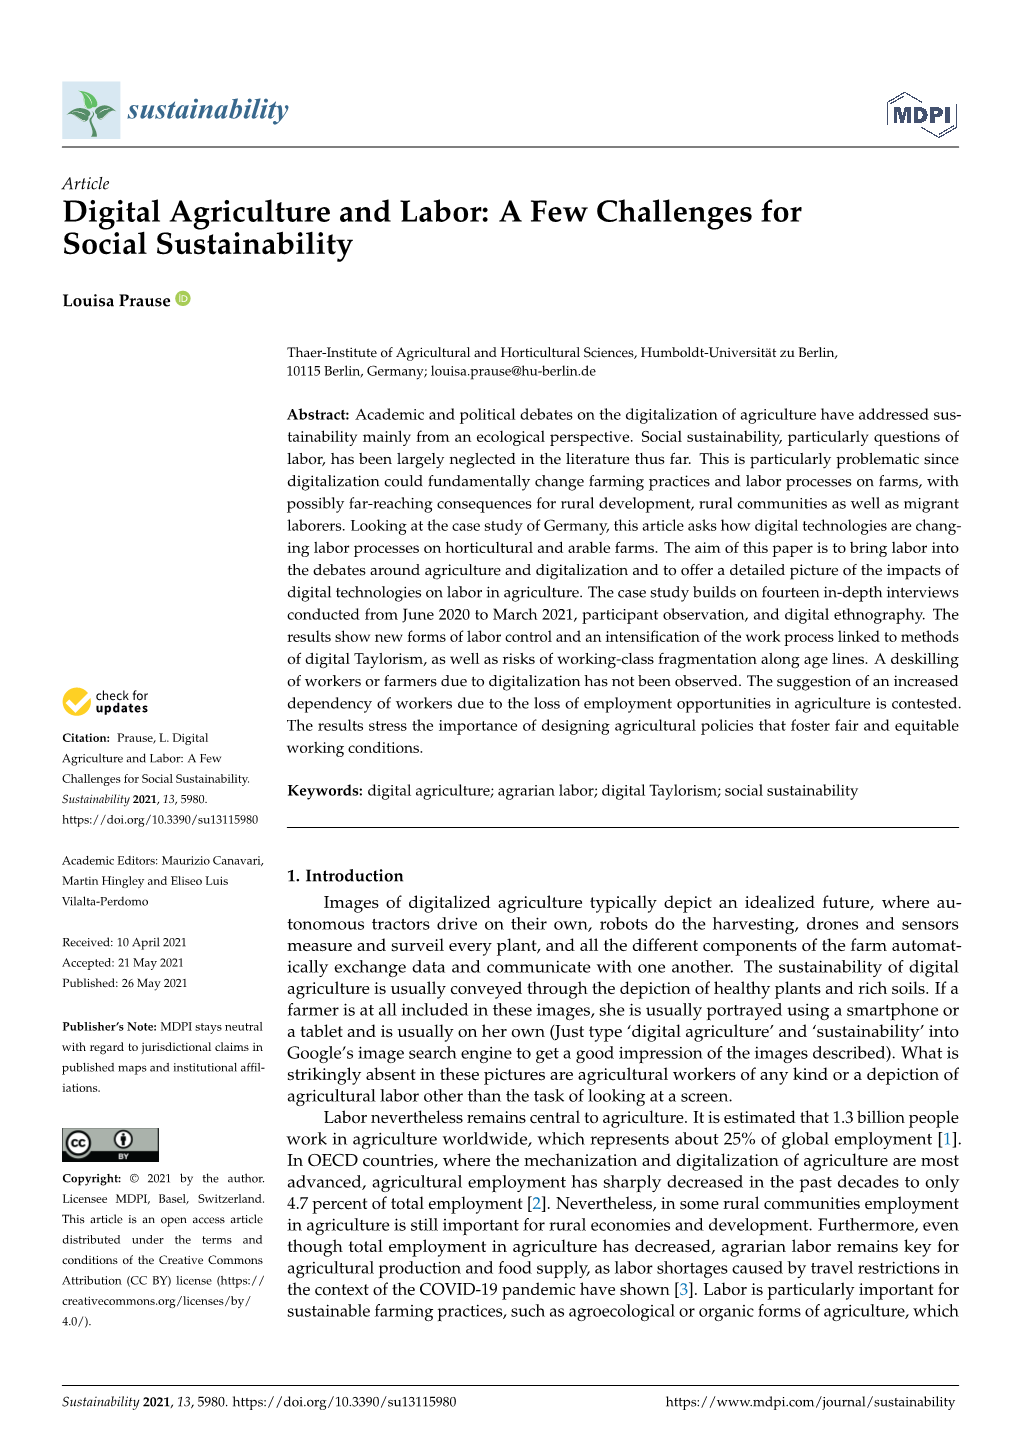 Digital Agriculture and Labor: a Few Challenges for Social Sustainability